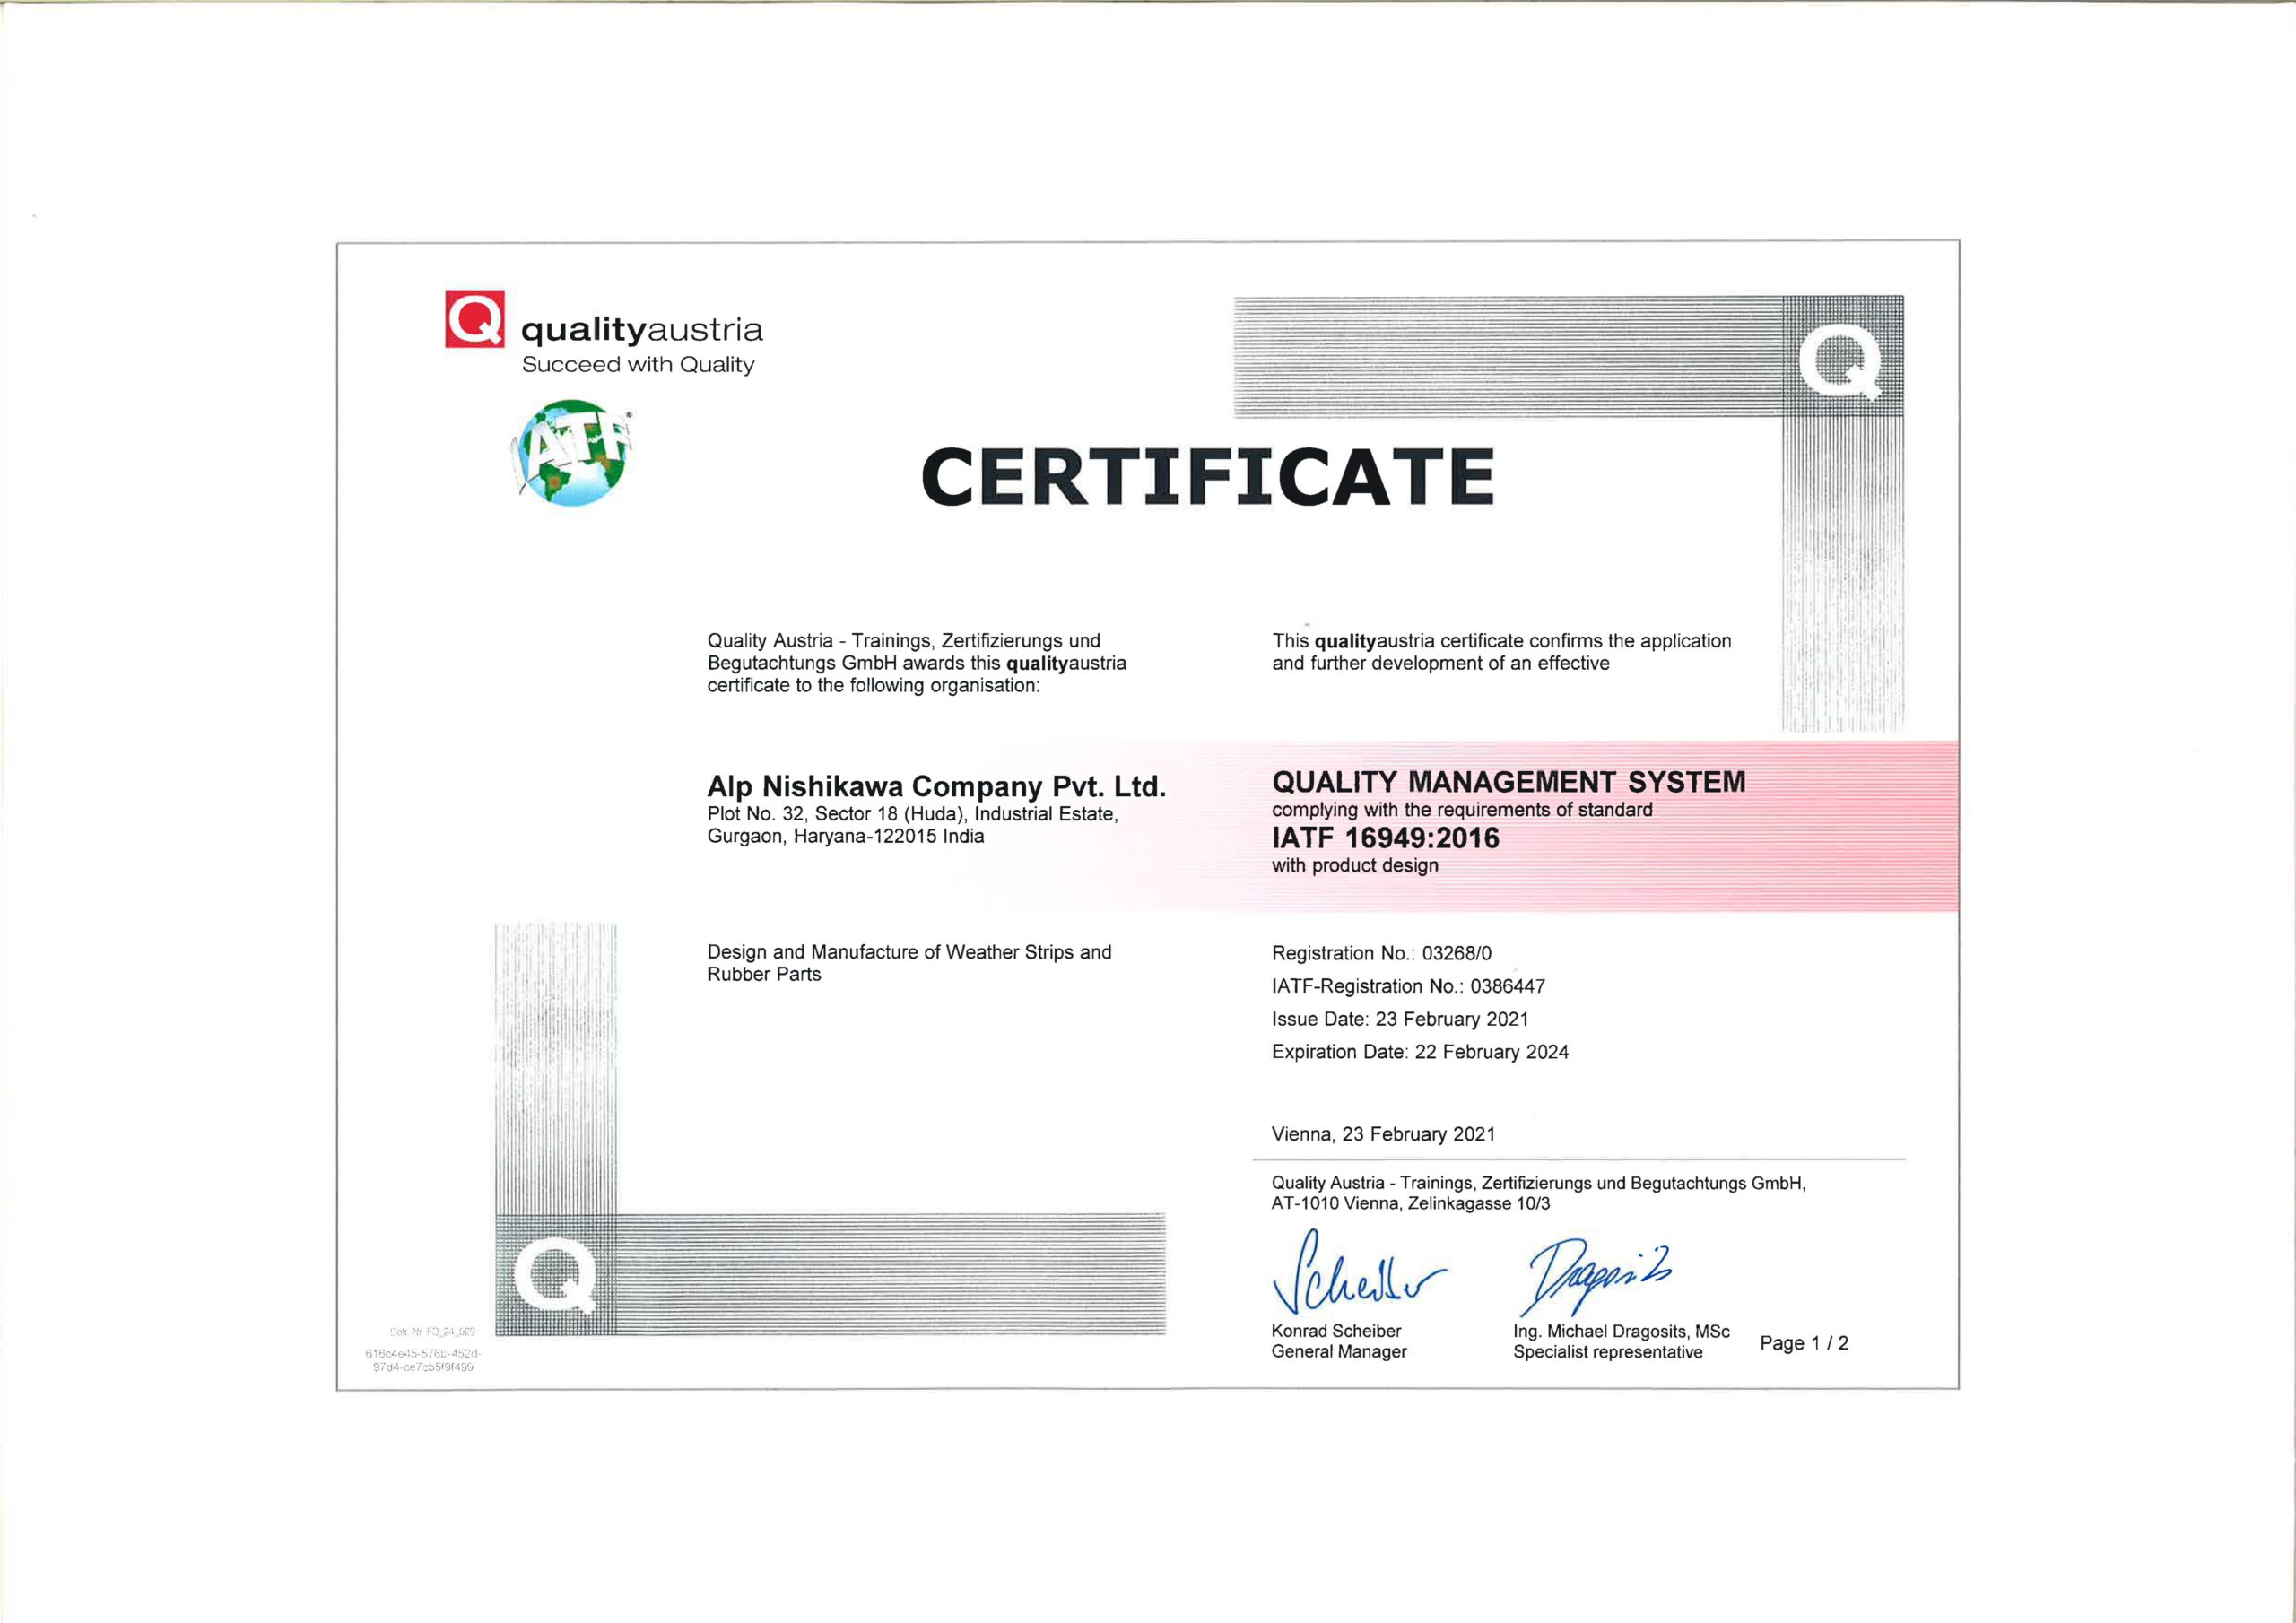 Quality management system certificate IATF 16949:2016 awarded to ALP Nishikawa Company Pvt. Ltd. for design and manufacture of weather strips and rubber parts by qualityaustria